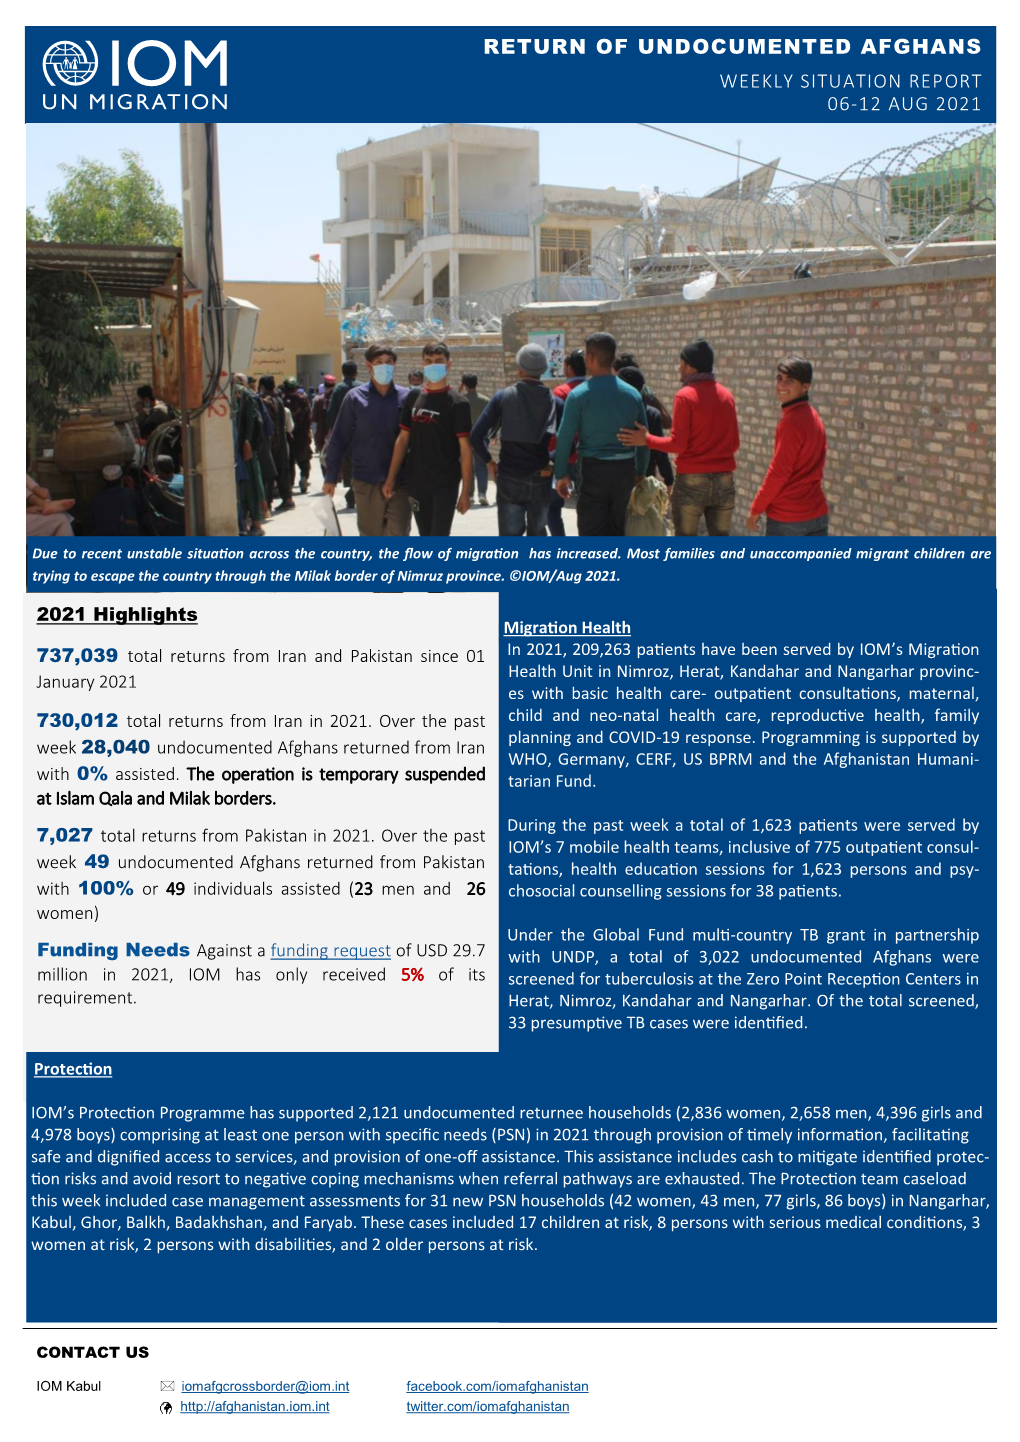 Return of Undocumented Afghans Weekly Situation Report 06-12 Aug 2021